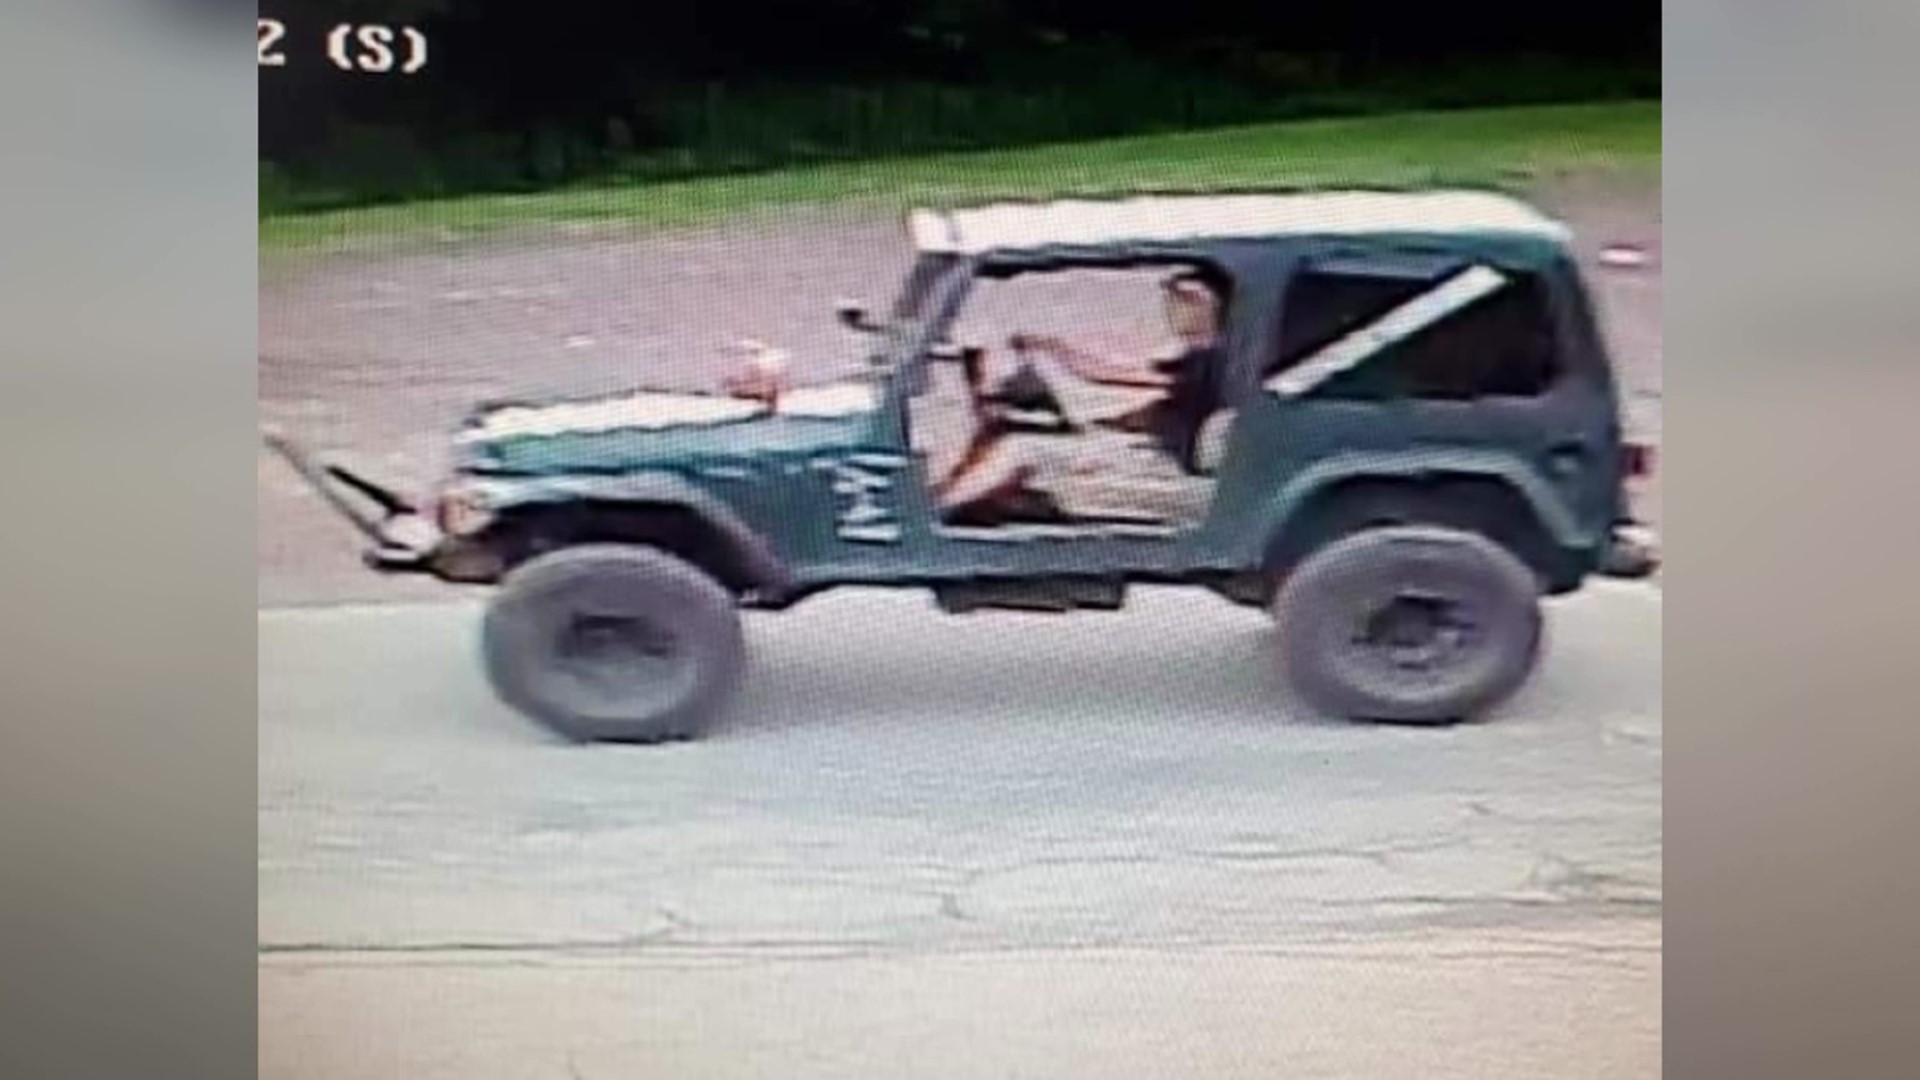 Surveillance pictures from Sunday show four different vehicles on the fields in Bear Creek Township.